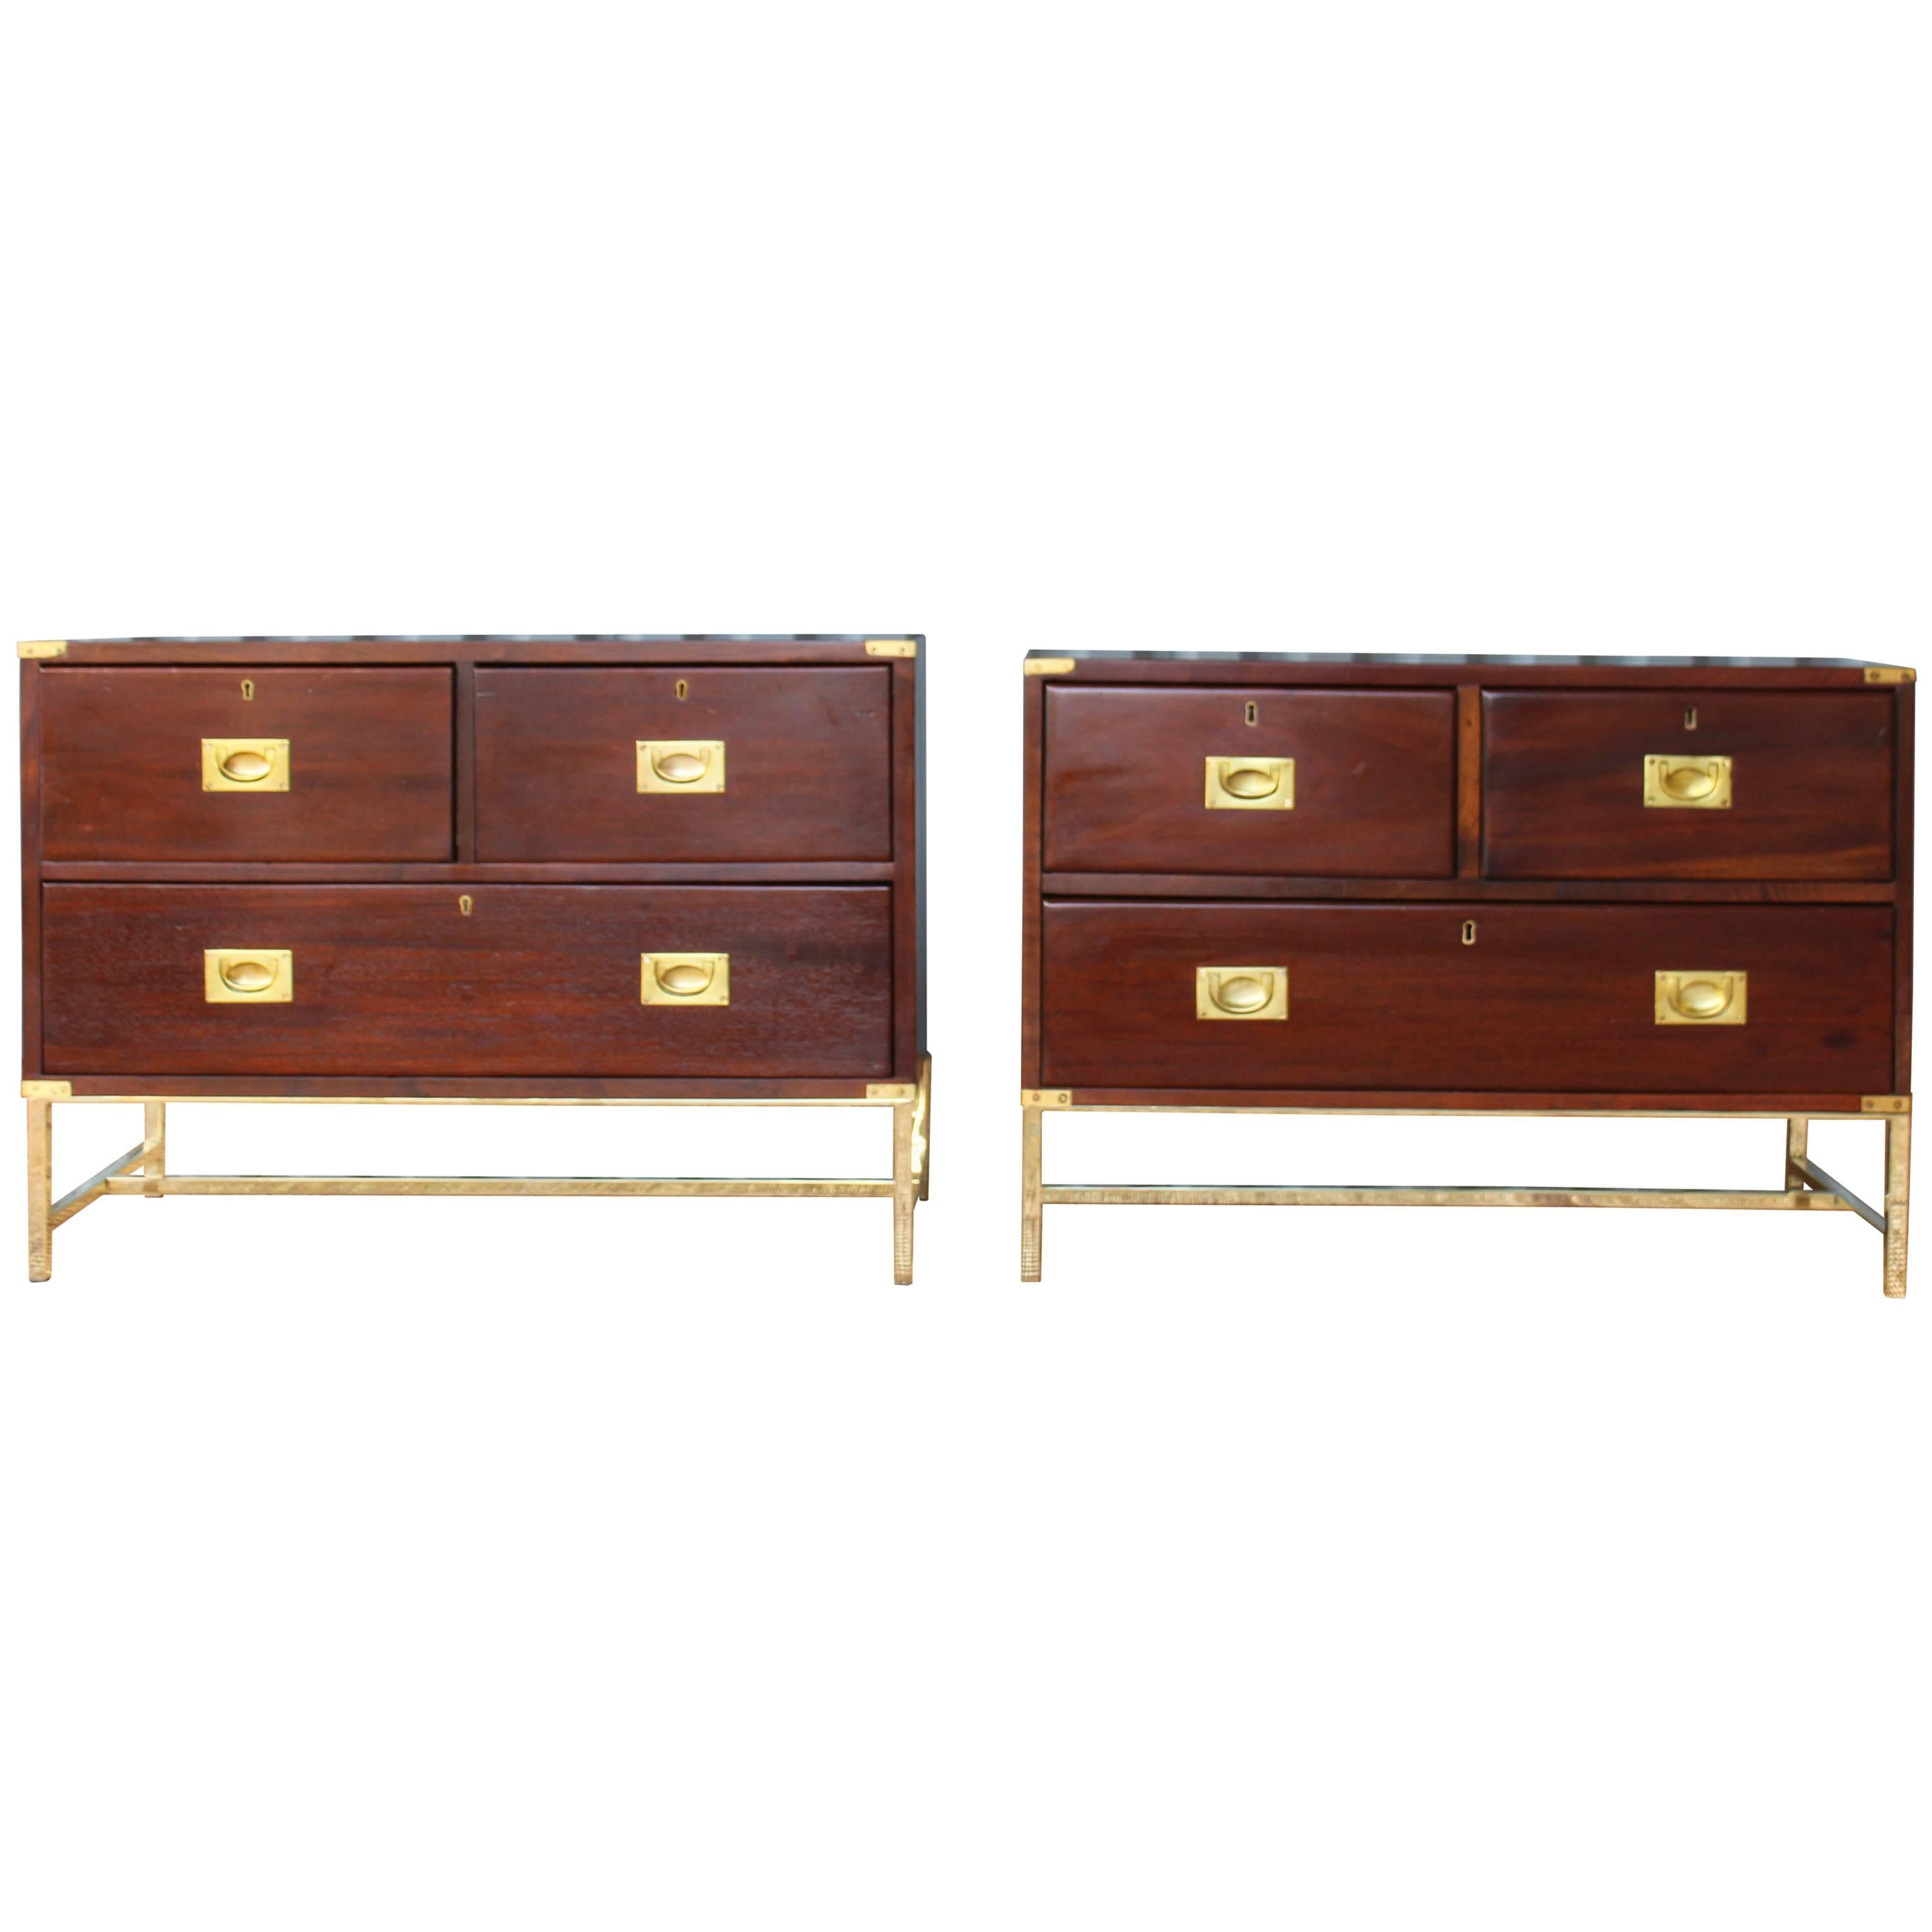 Pair of 19th Century English Campaign Chests